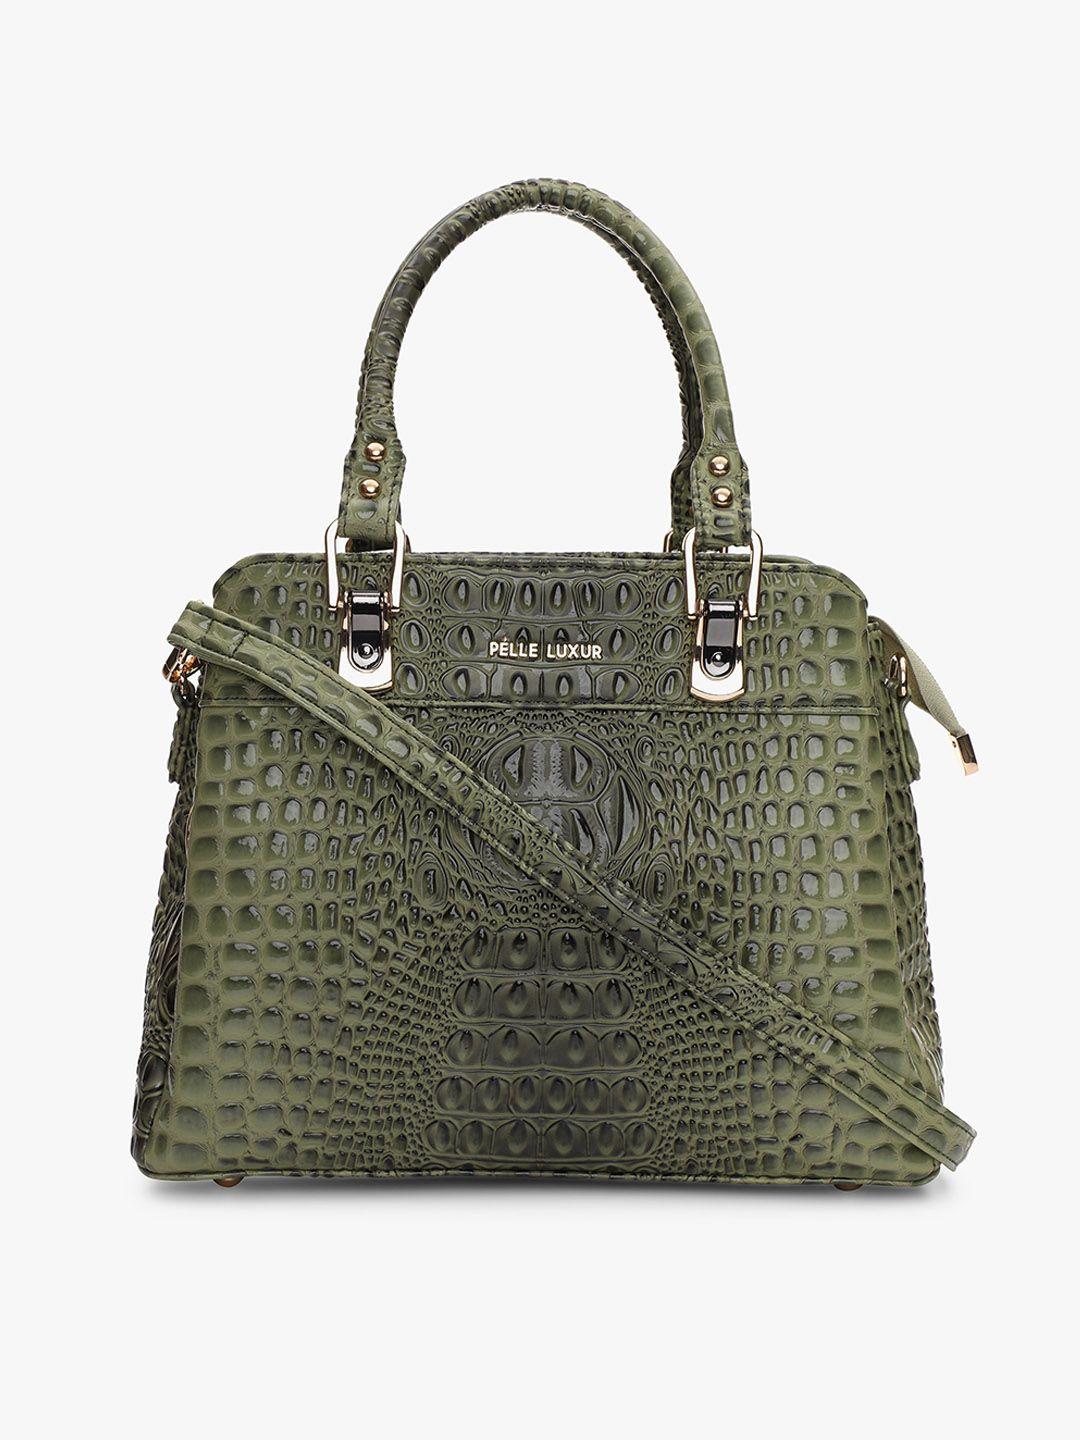 pelle-luxur-structured-handheld-bag-with-quilted